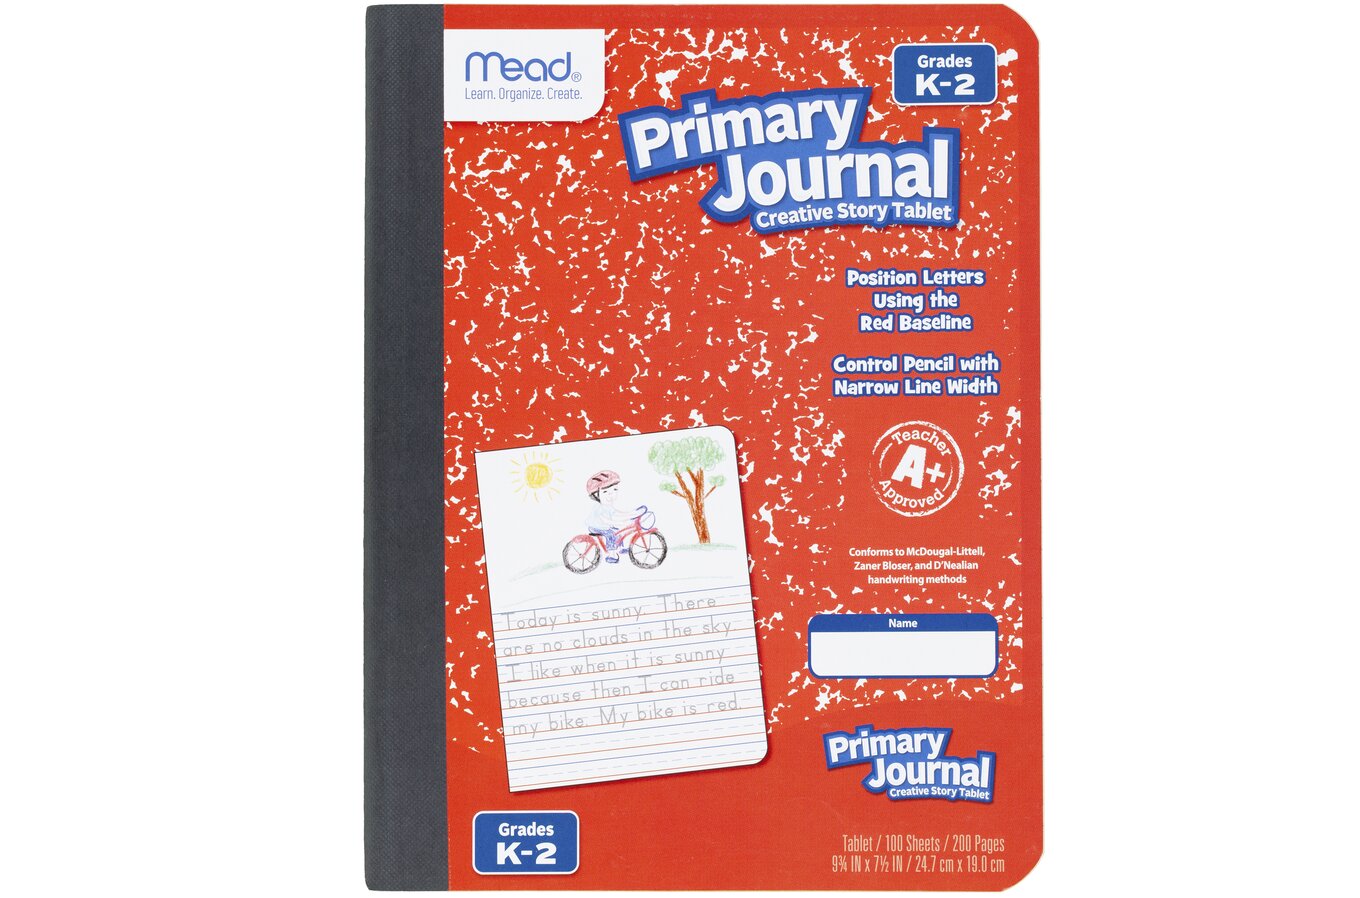 Mead Primary Journal, Creative Story Tablet, Grades K-2